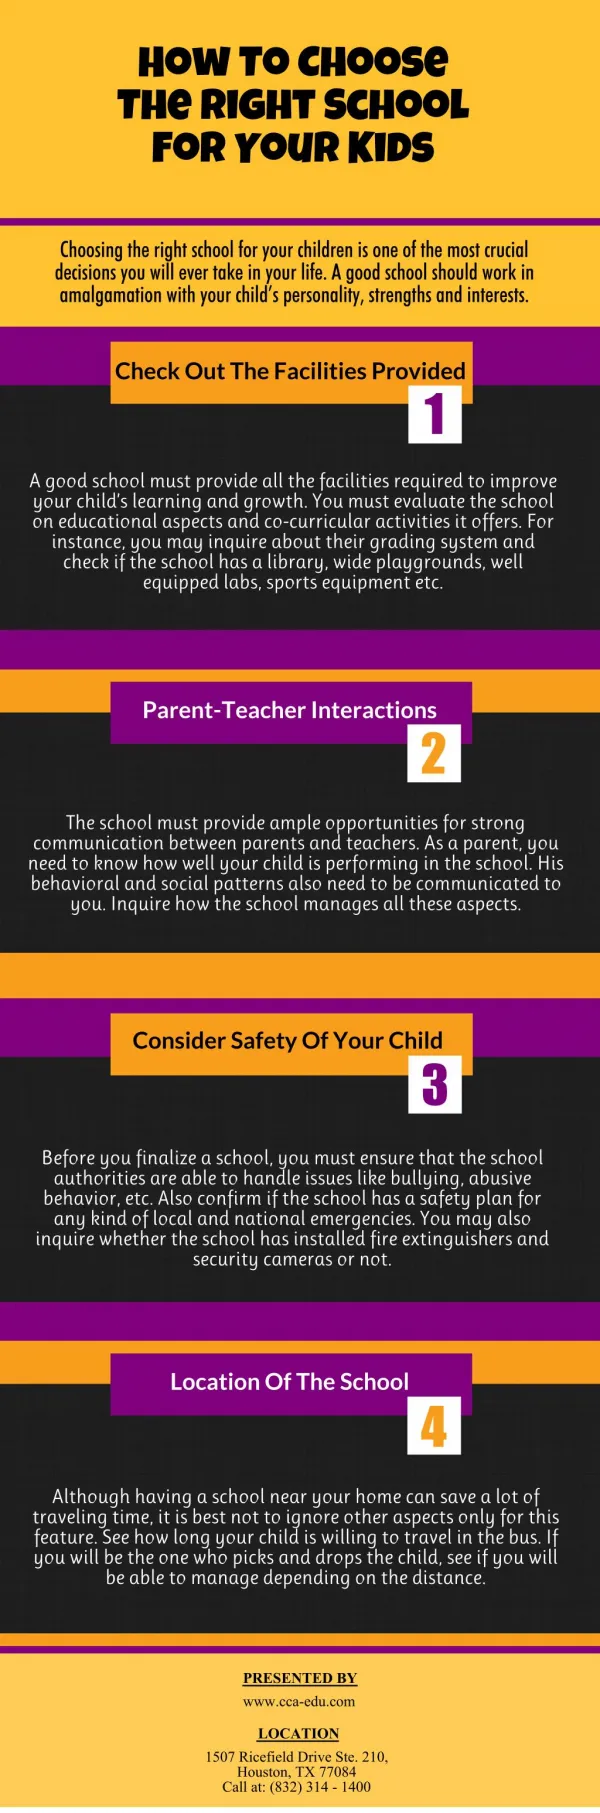 Choosing The Right School For Your Kids